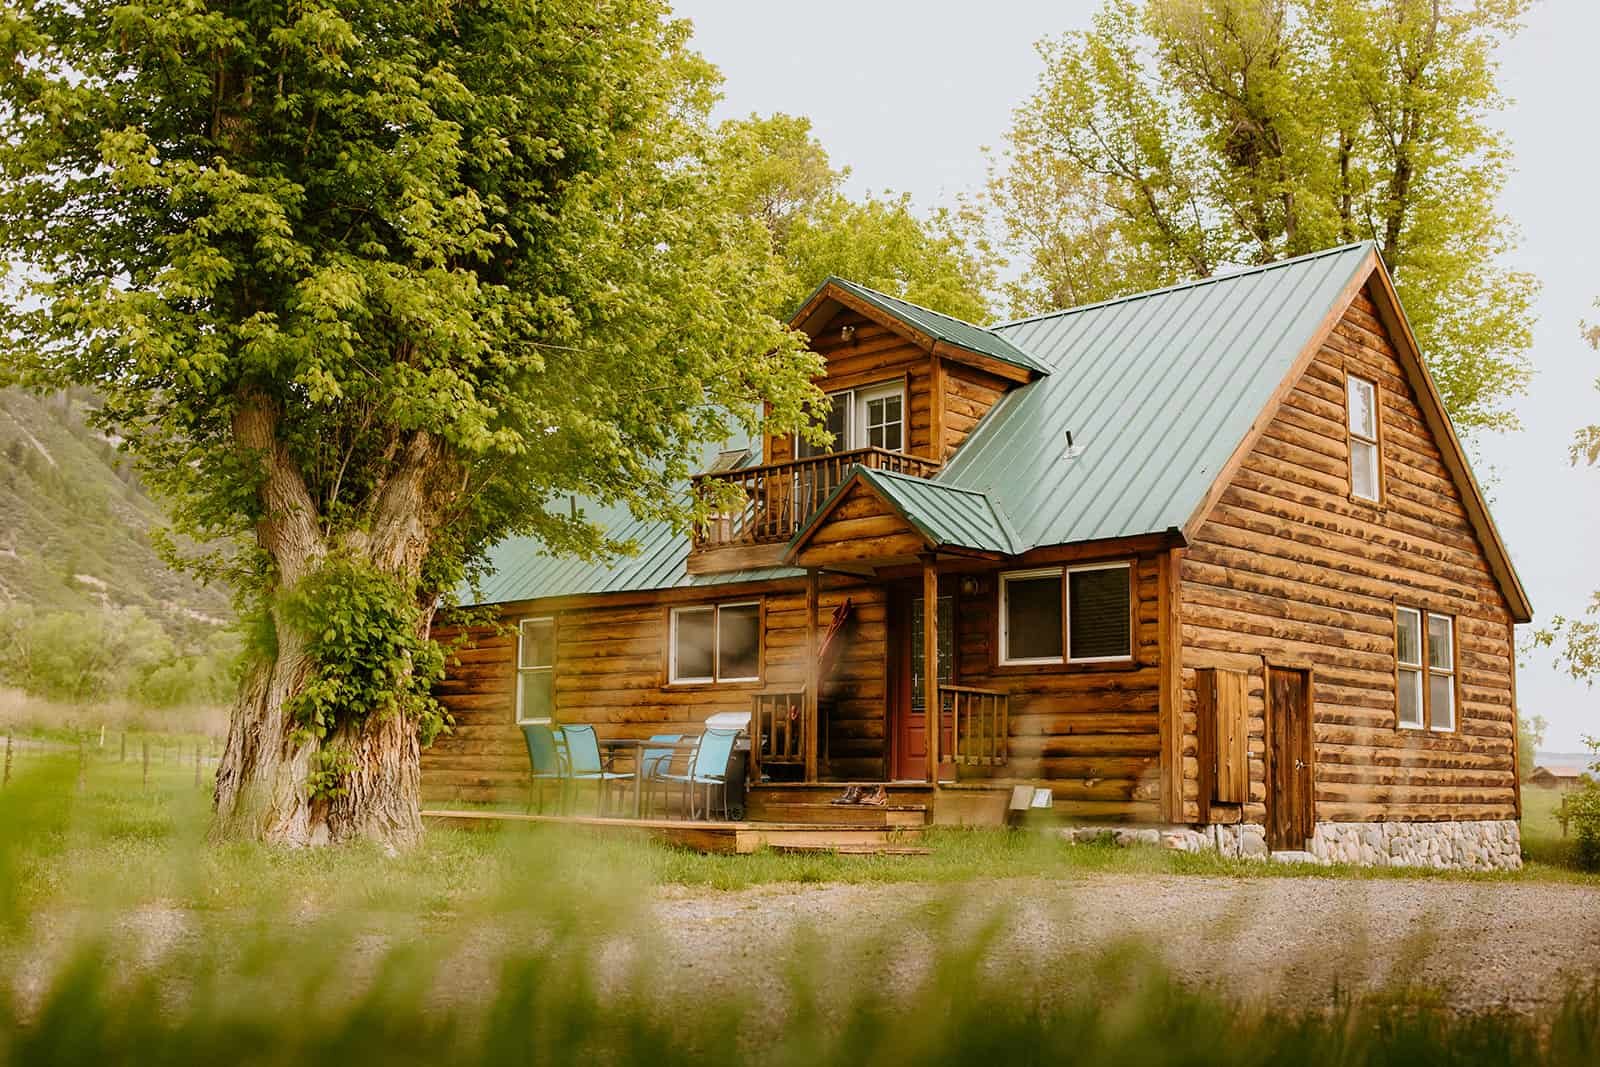 A cabin rental for elopements and weddings in the San Juans